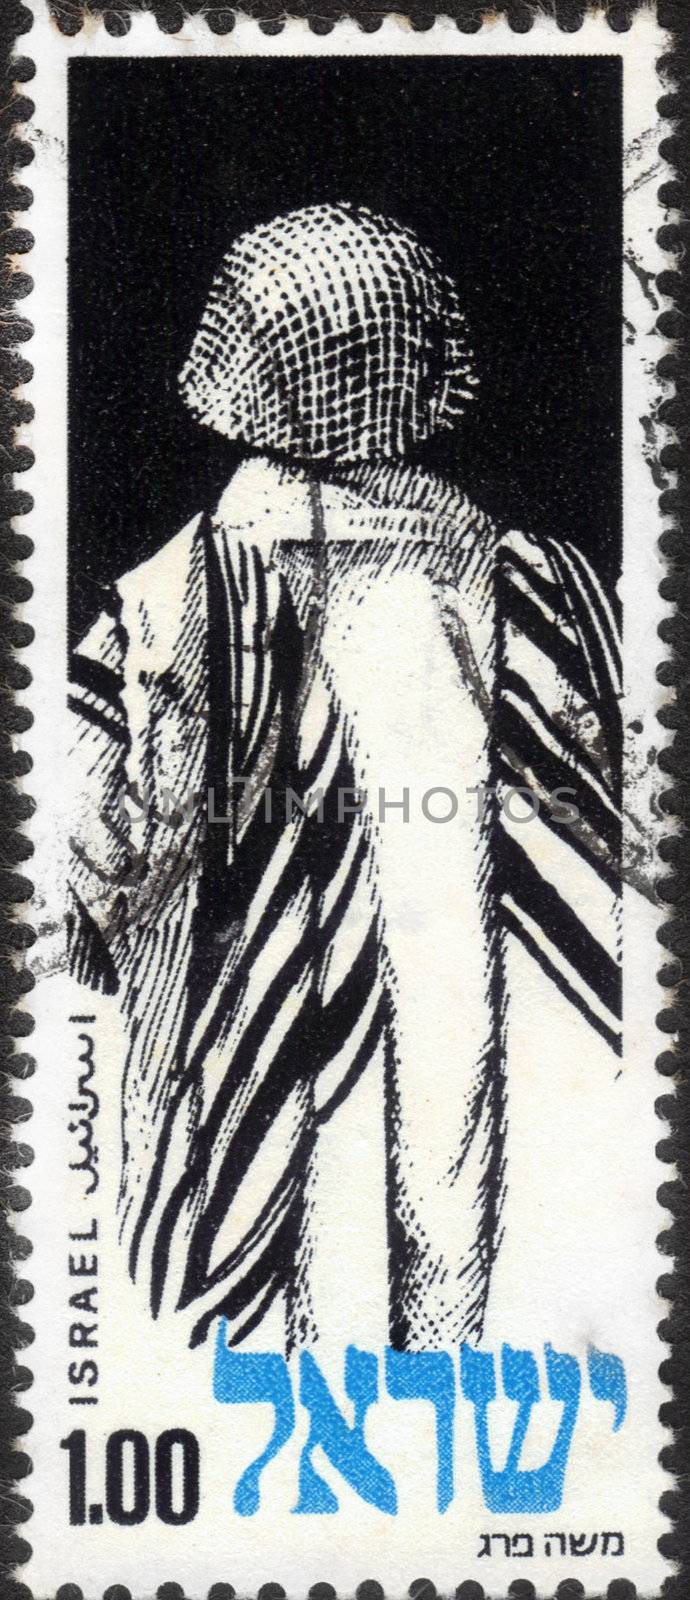 ISRAEL - CIRCA 1974: stamp printed by Israel, shows an Israeli soldier, dressed in religious clothing, dedicated to day memory of the dead Israeli Soldier, circa 1974